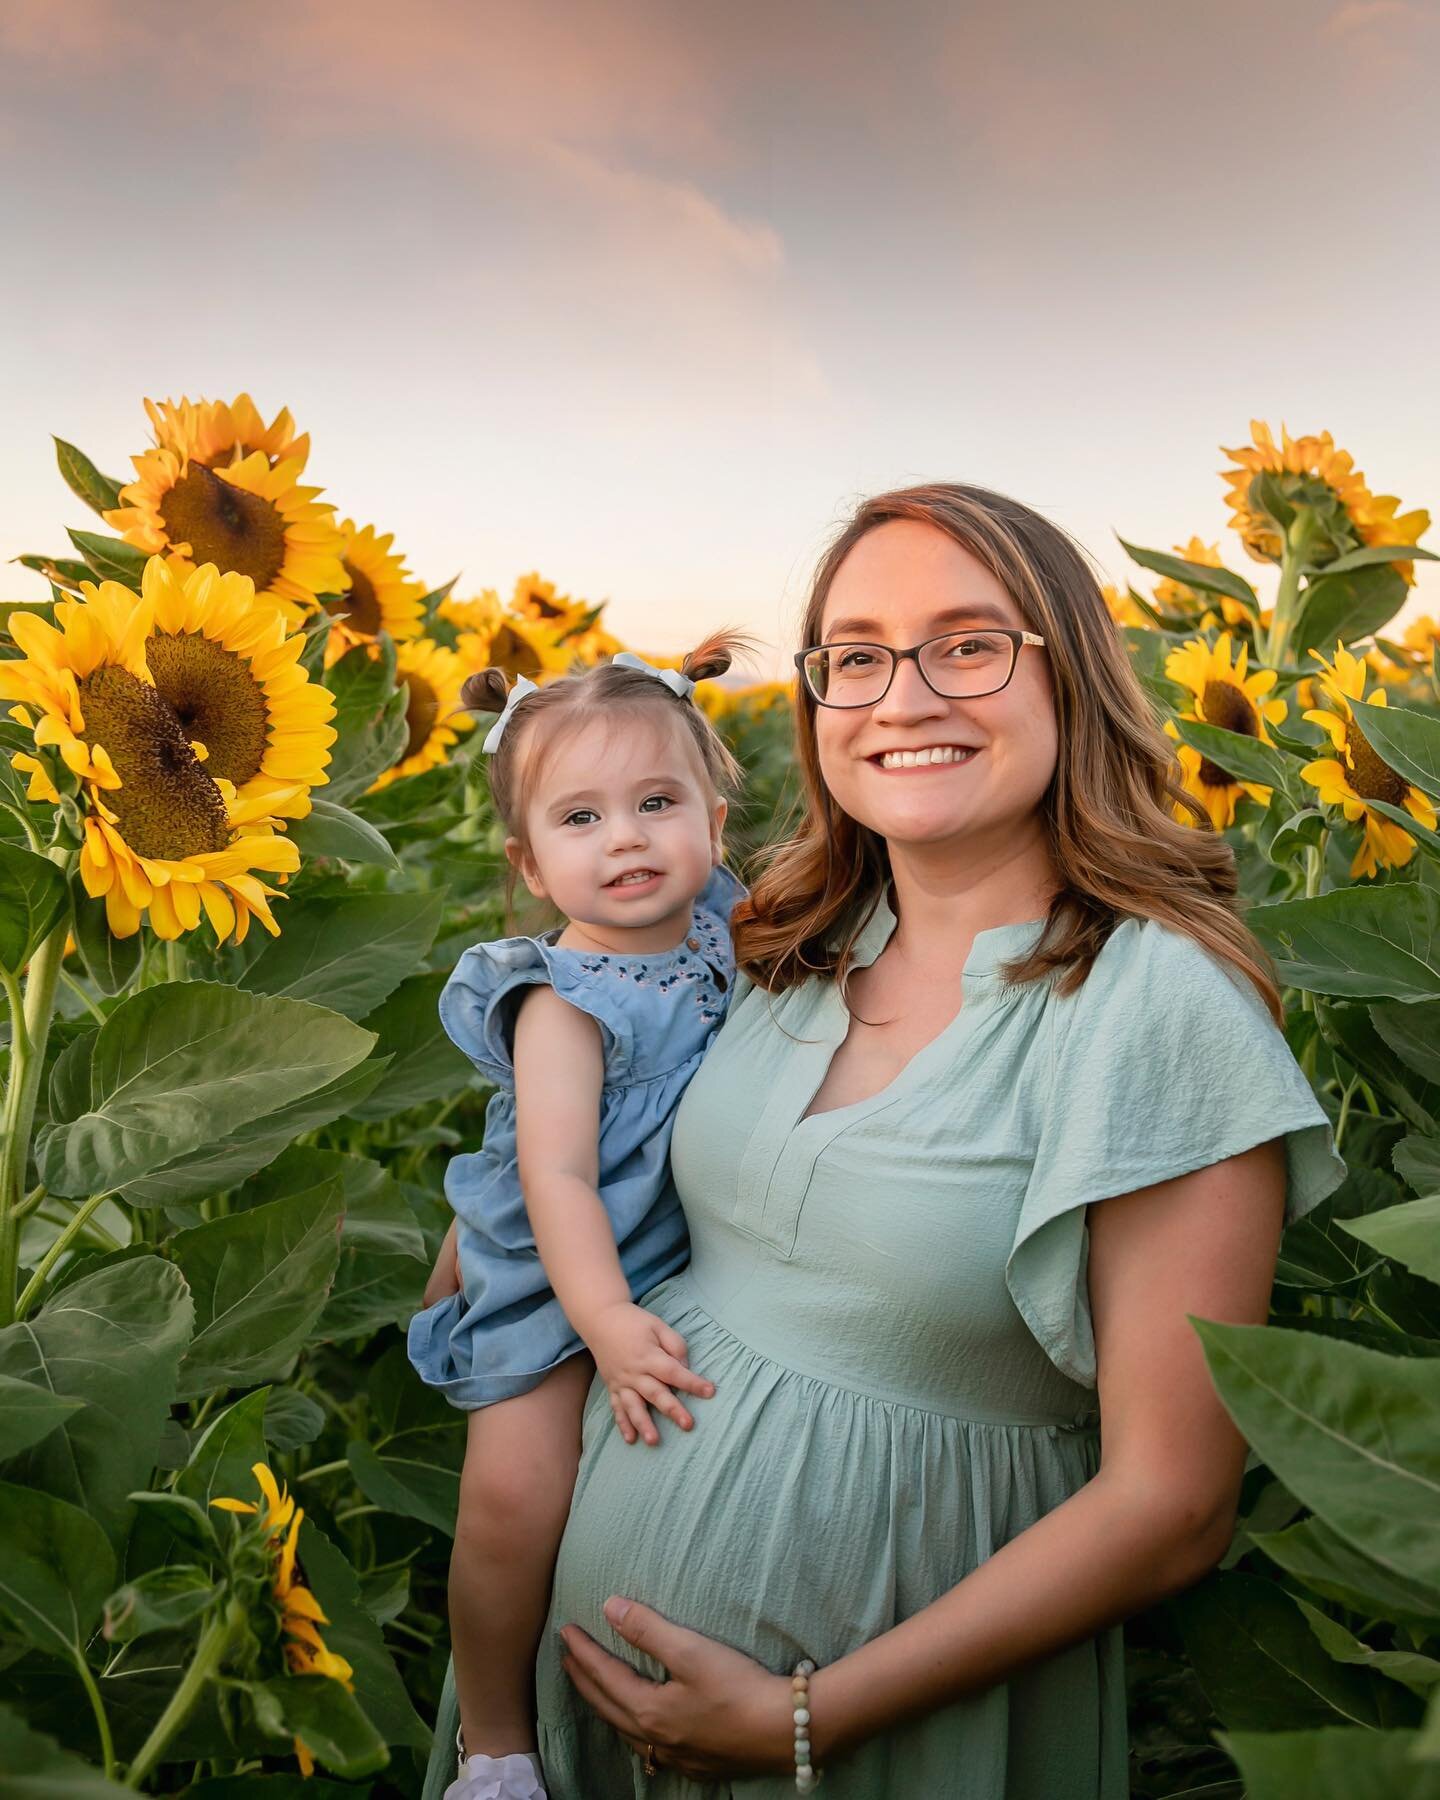 Amanda and her daughter at the Sweet Flower Home sunflowers. 🌻💕🌻 

@a.j.guti @sweetflowerhome